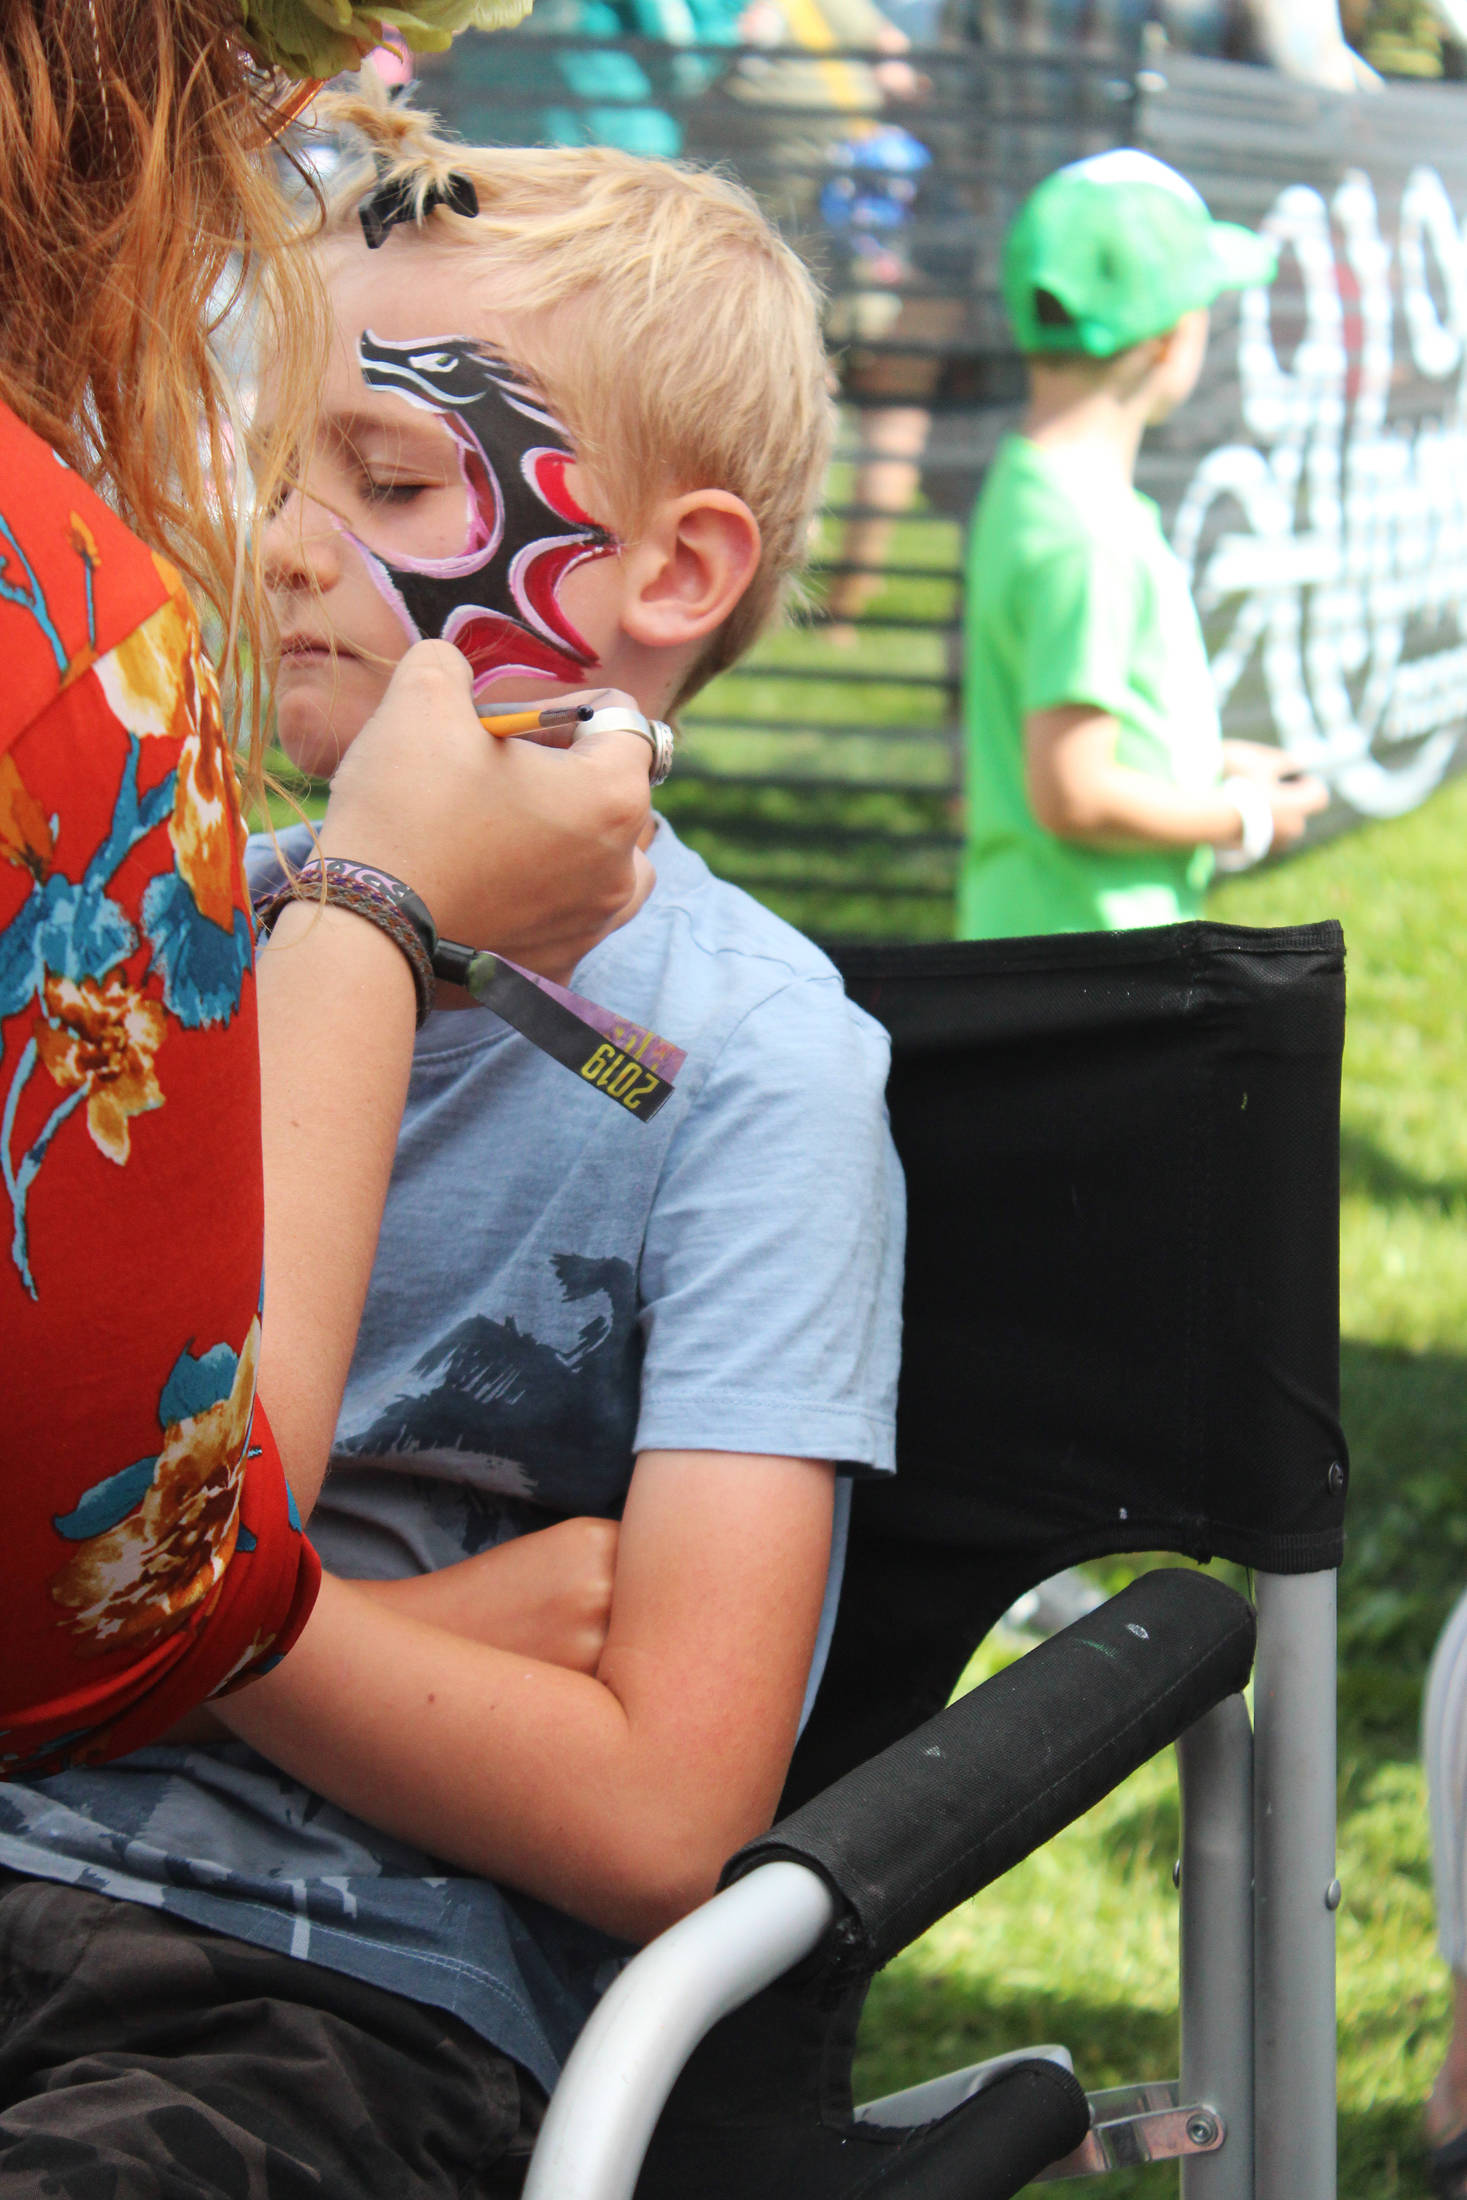 Iver Ledahl, 8, of Kenai, gets his face painted on Friday, Aug. 2, 2019 at Salmonfest in Ninilchik, Alaska. (Photo by Megan Pacer/Homer News)